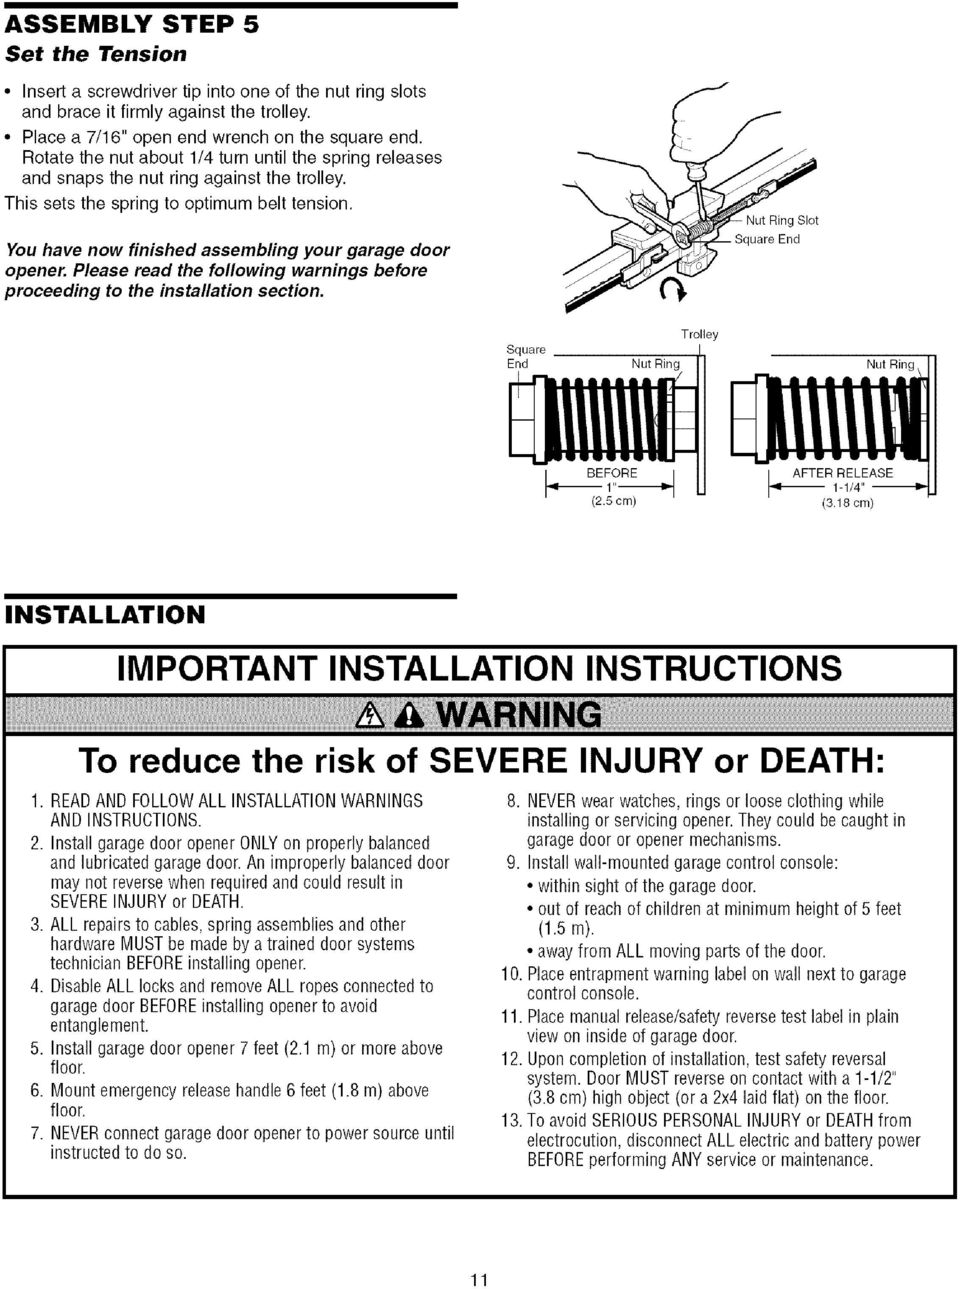 S j You have now finished assembling your garage door opener. Please read the following warnings before proceeding to the installation section.